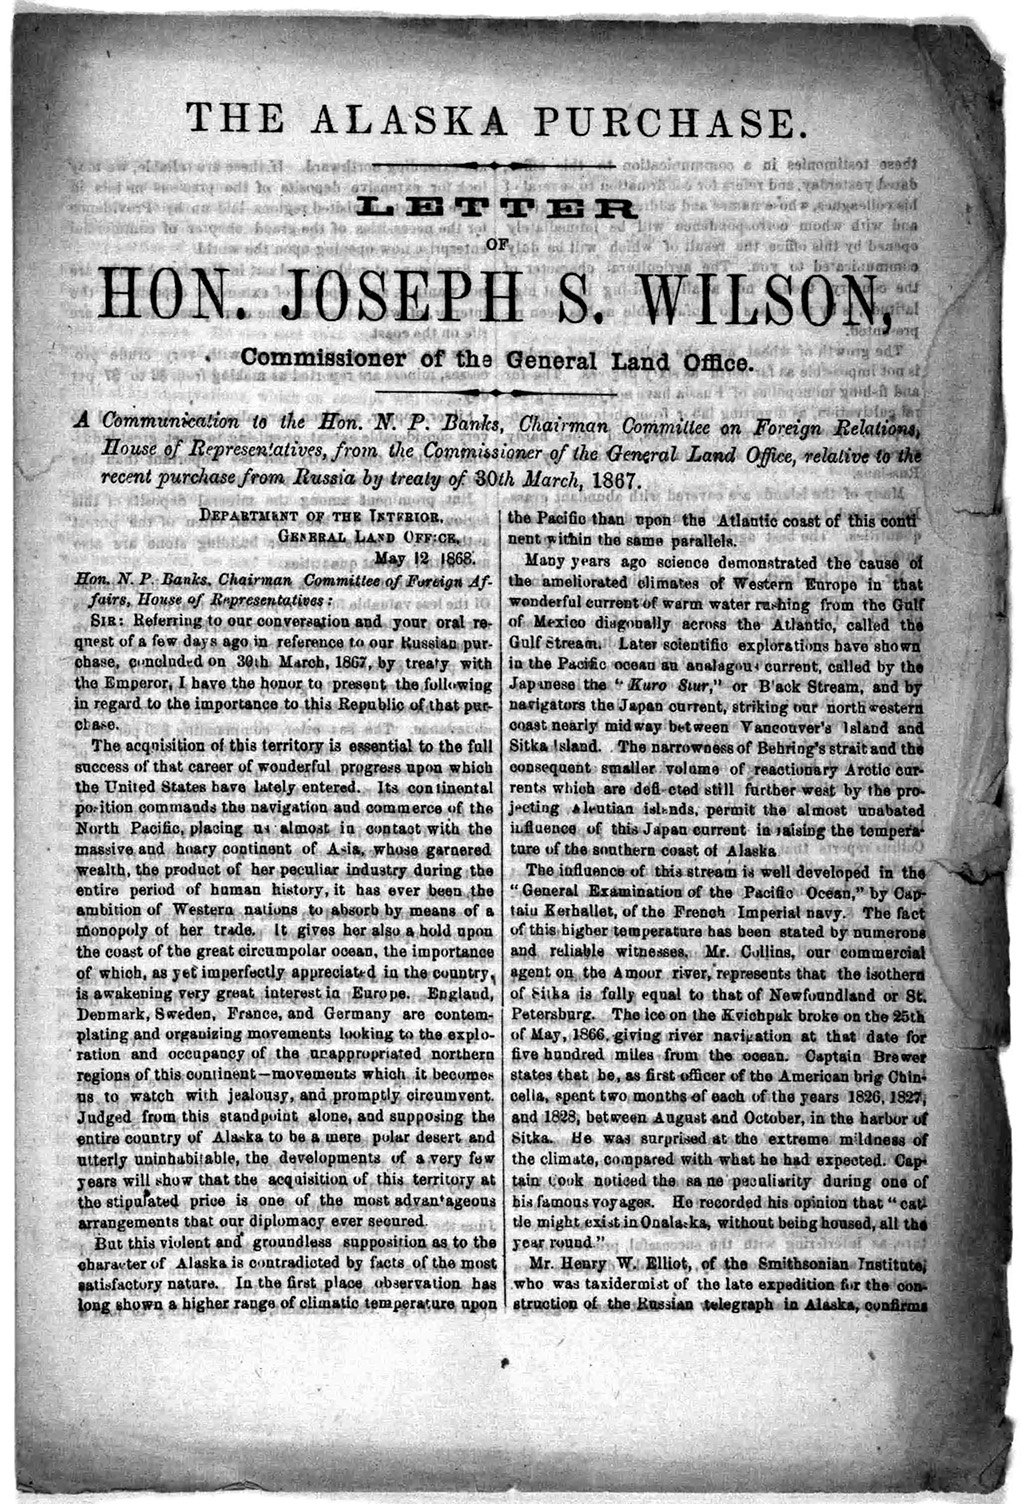 Image shows the front page of the Alaska Purchase Letter of Hon. Joseph A. Wilson